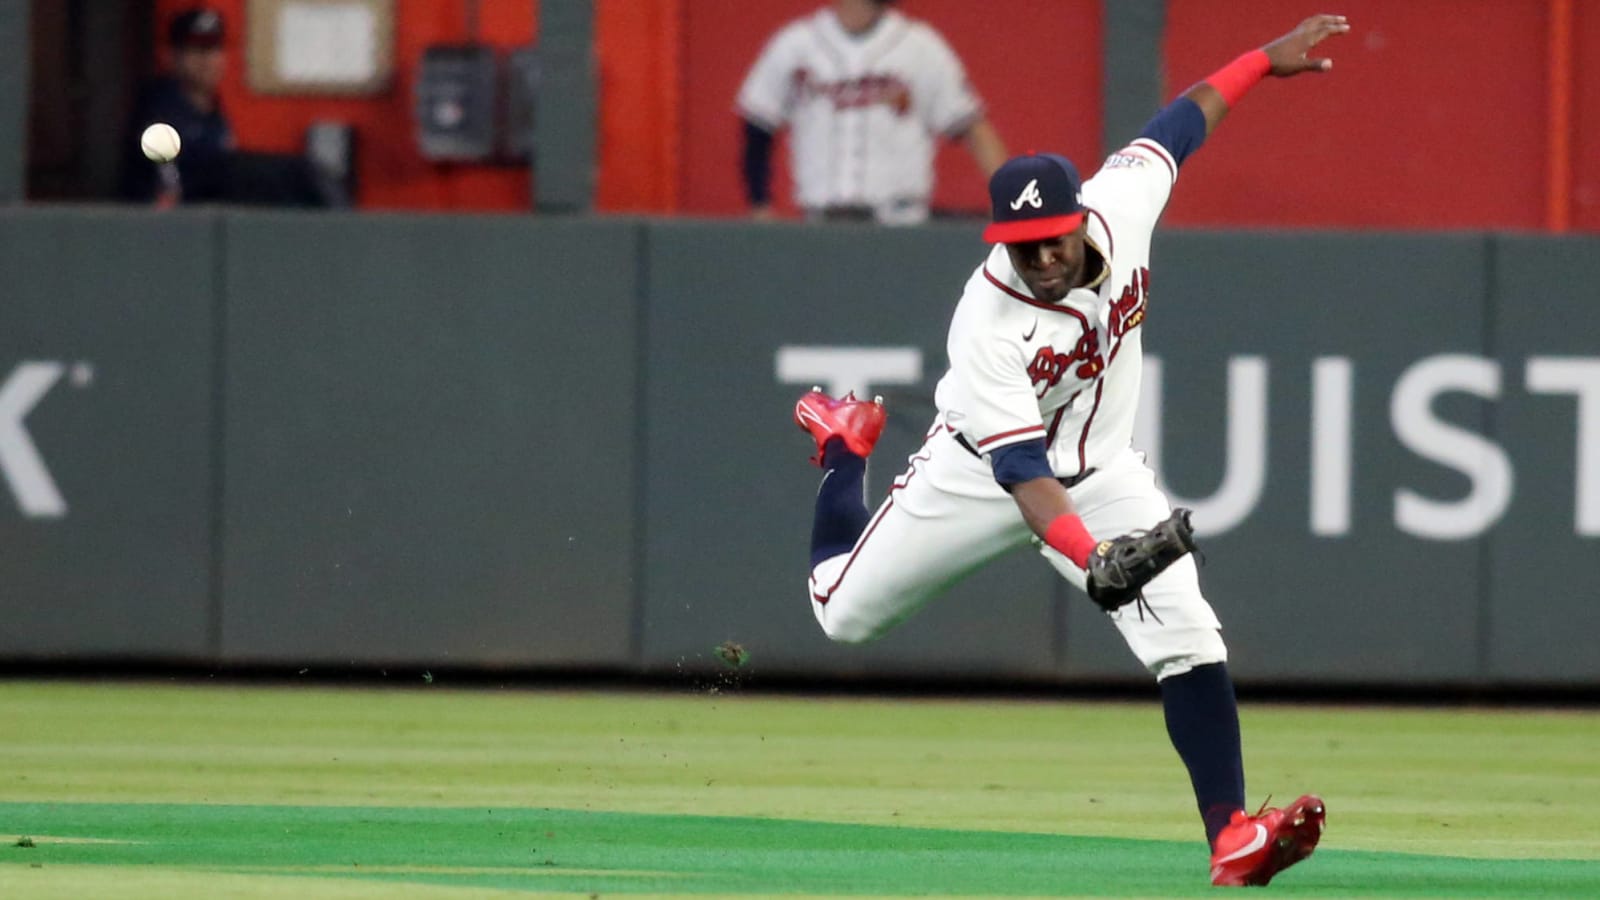 Watch: Braves' Guillermo Heredia misplays ball in Game 2 after entering game